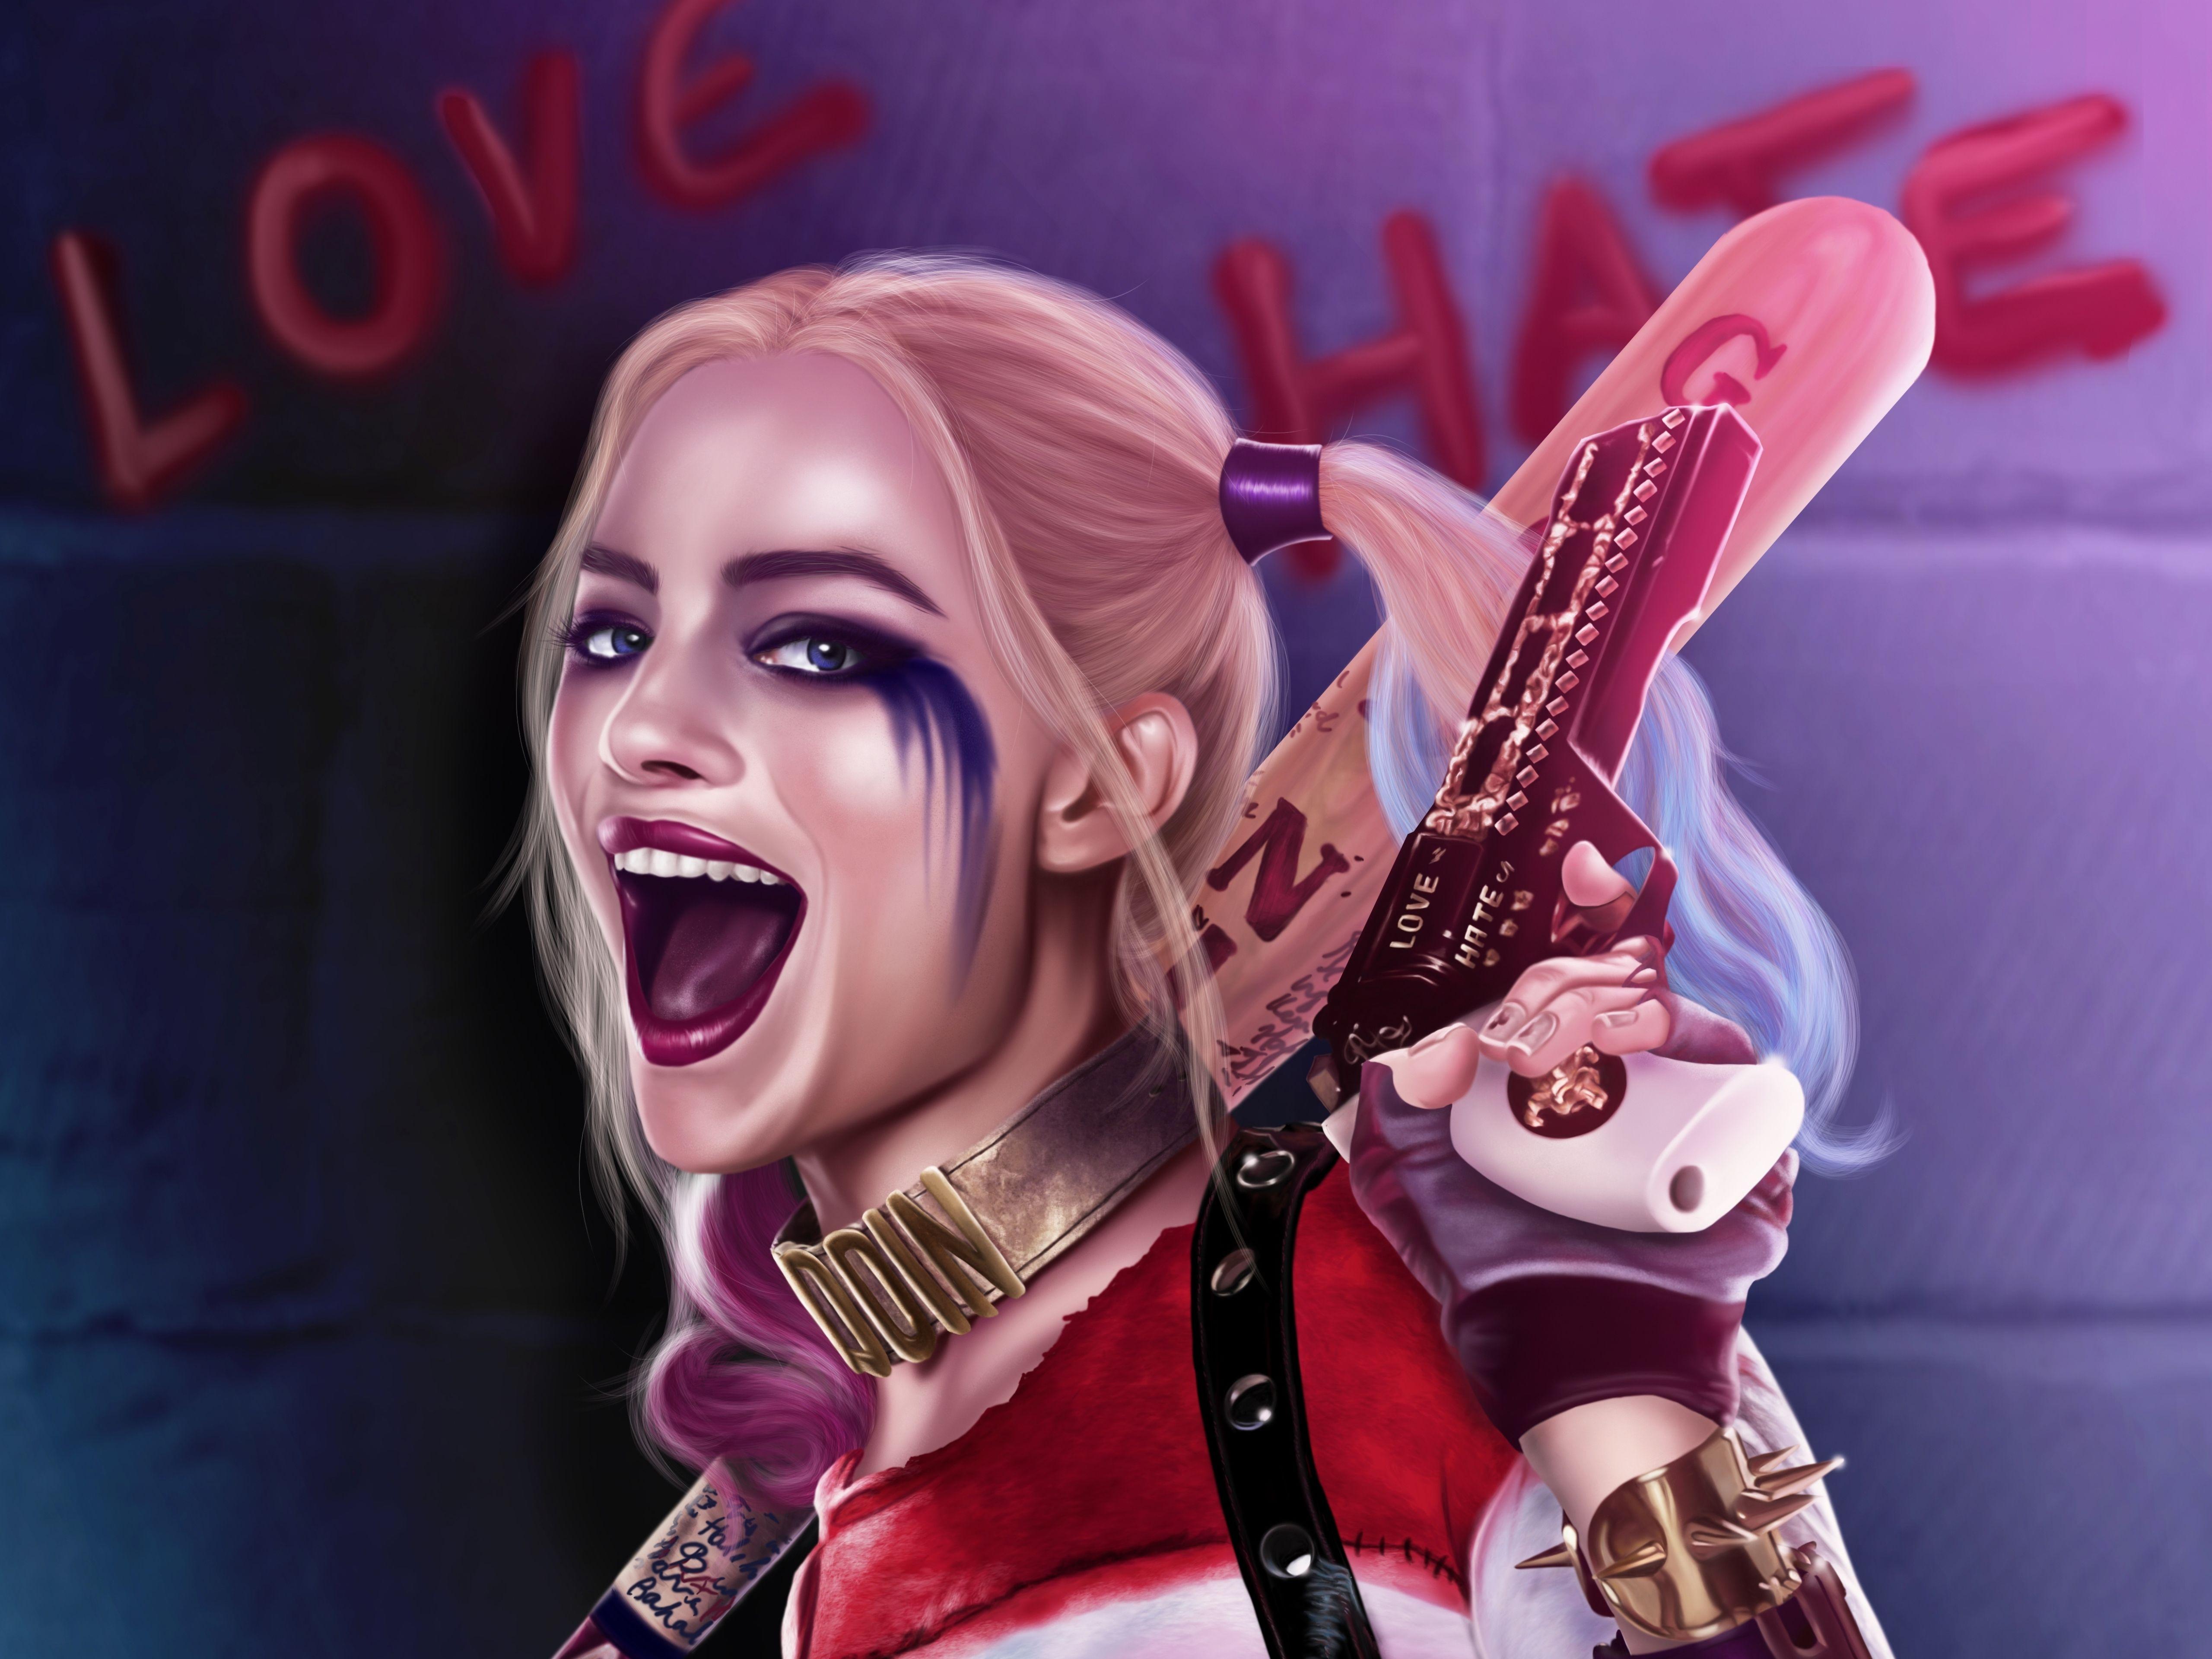 Featured image of post Harley Quinn Hd Pics Ultra hd 4k harley quinn wallpapers for desktop pc laptop iphone android phone smartphone imac macbook tablet mobile device